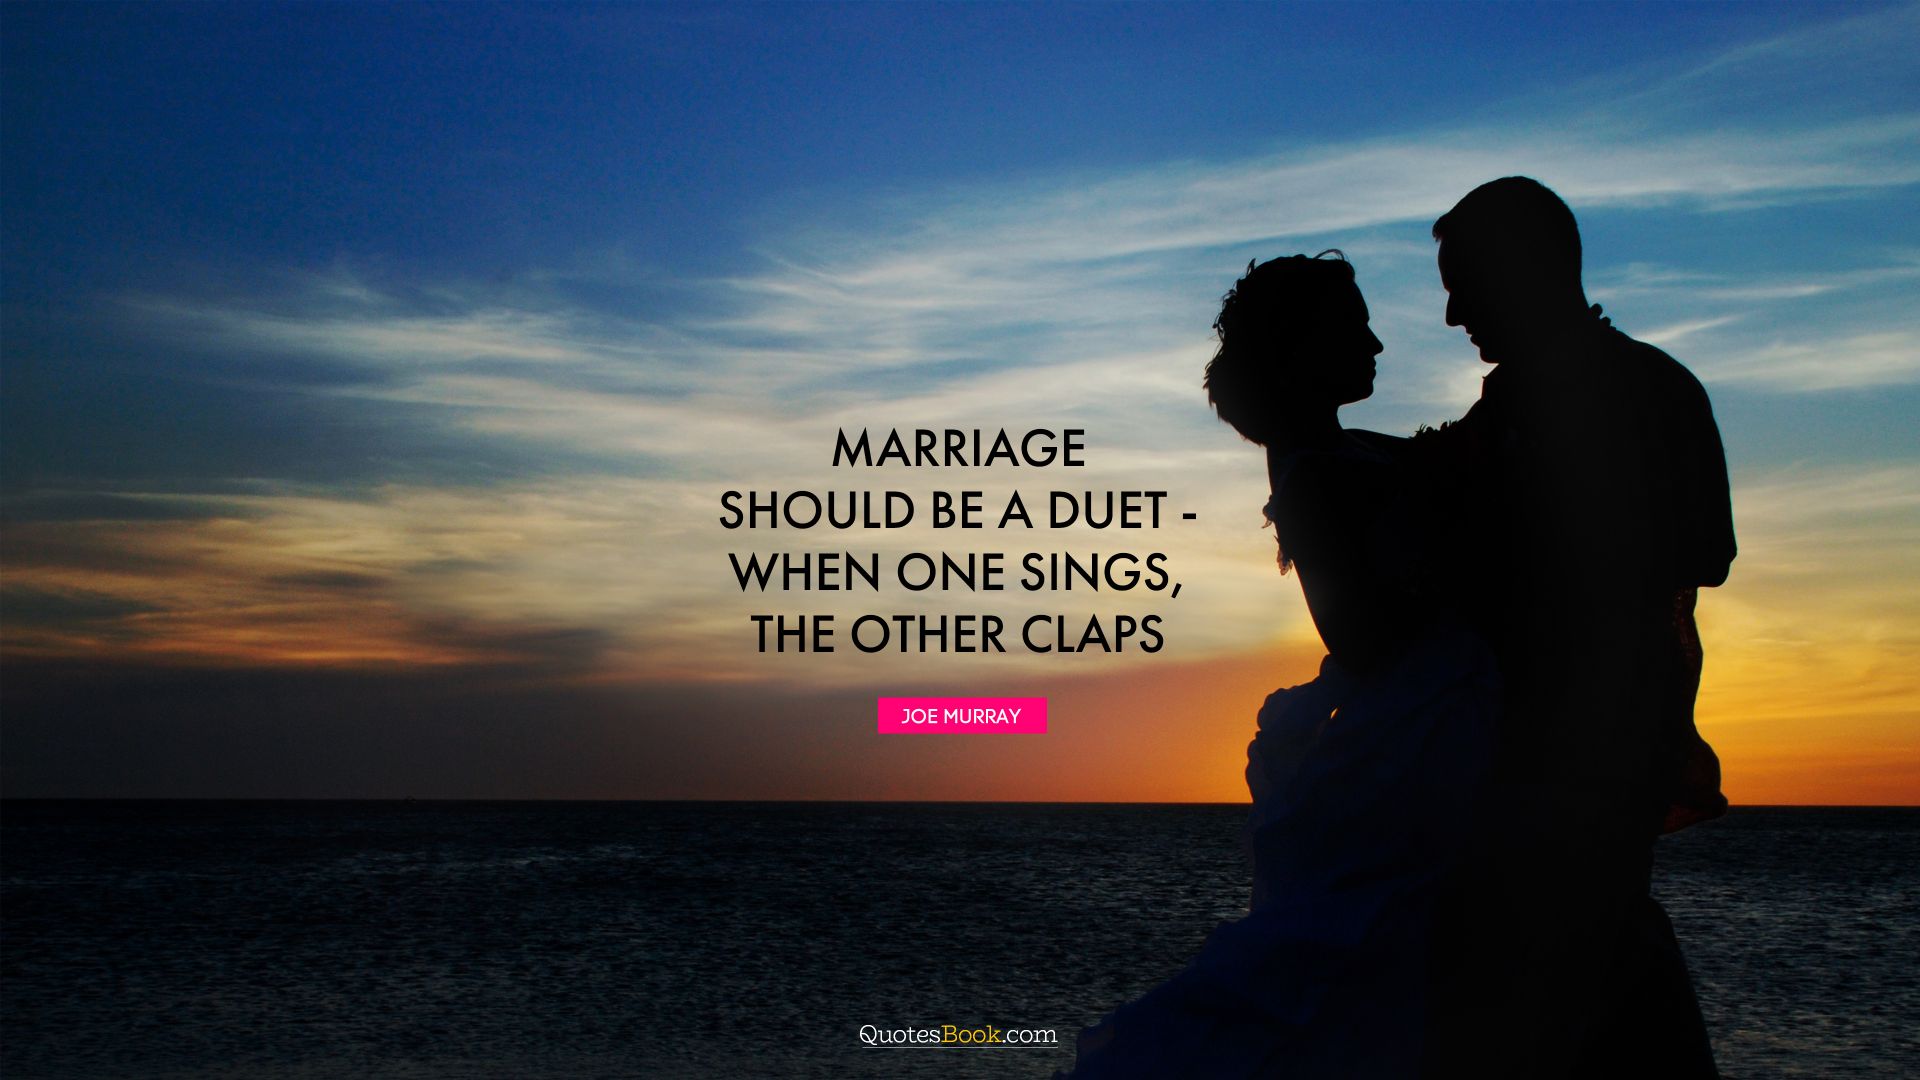 Marriage should be a duet - when one sings, the other claps. - Quote by Joe Murray